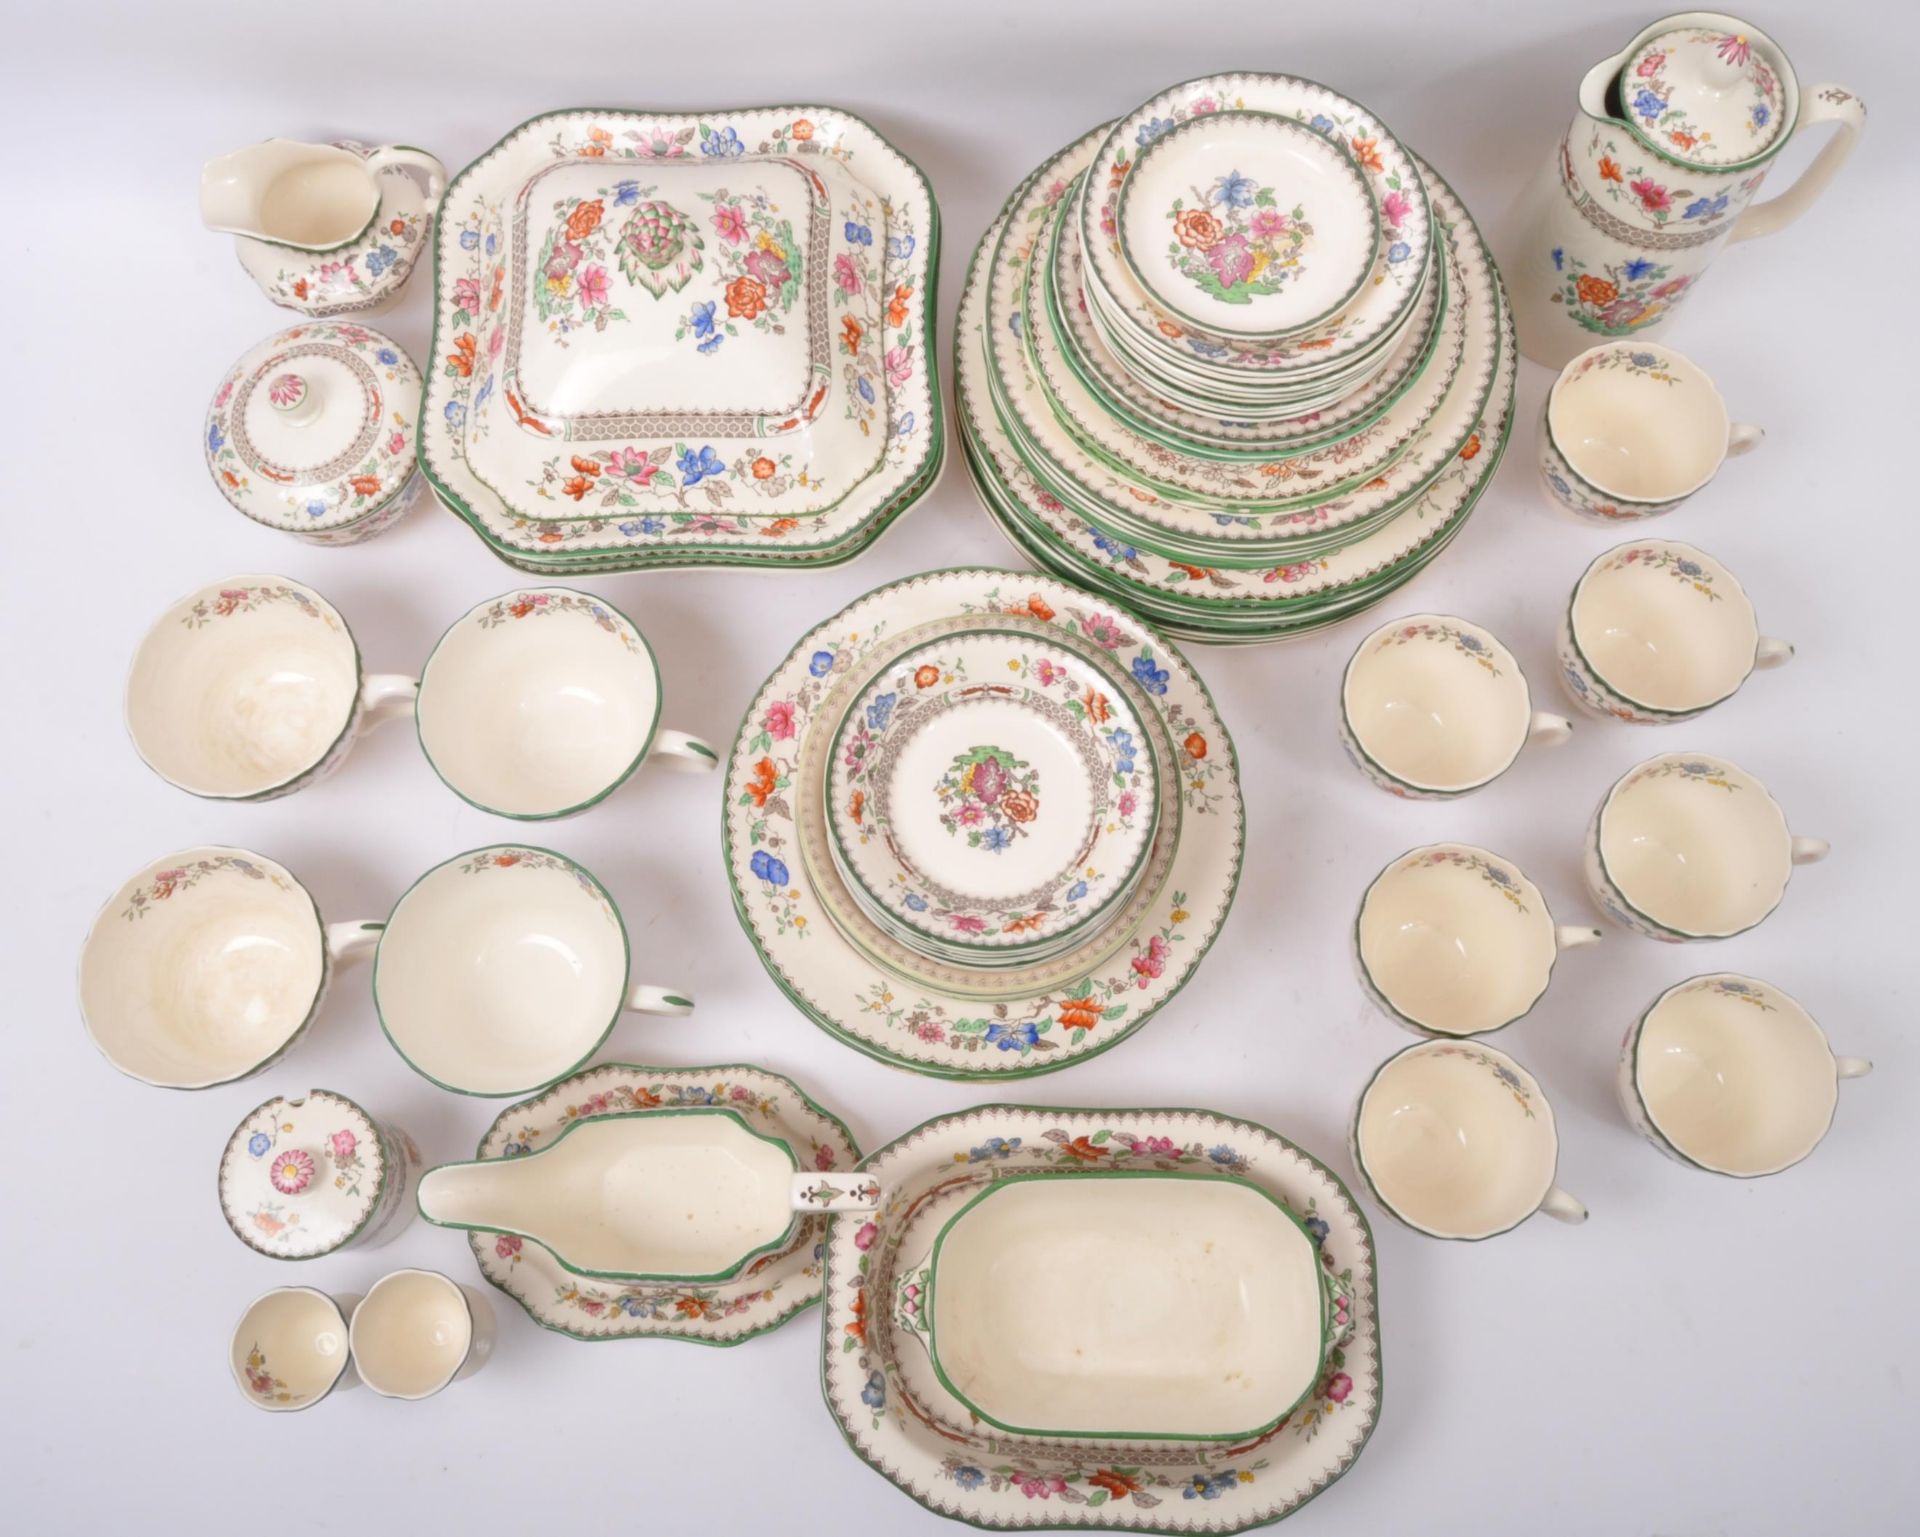 EARLY 20TH CENTURY COPELAND SPODE 'CHINESE ROSE' DINNERWARE - Image 3 of 8